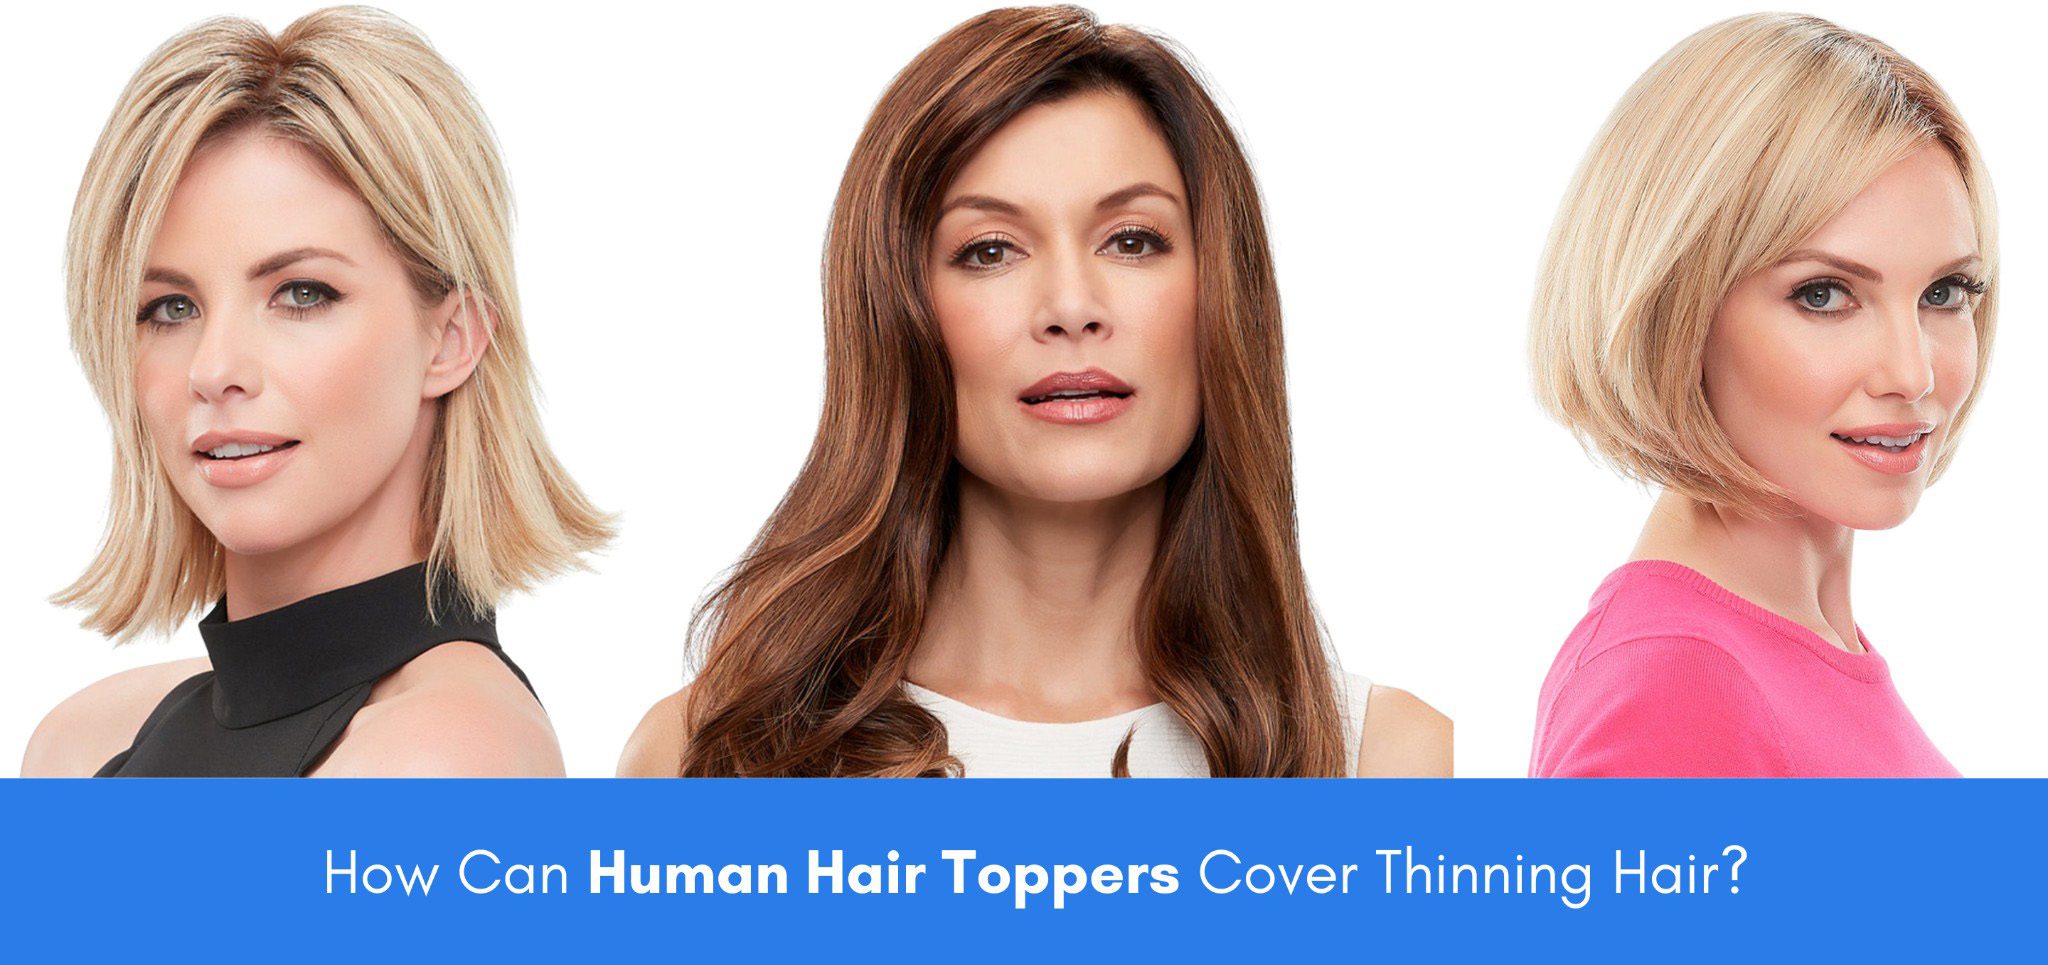 How can Human Hair Toppers Cover Thinning Hair